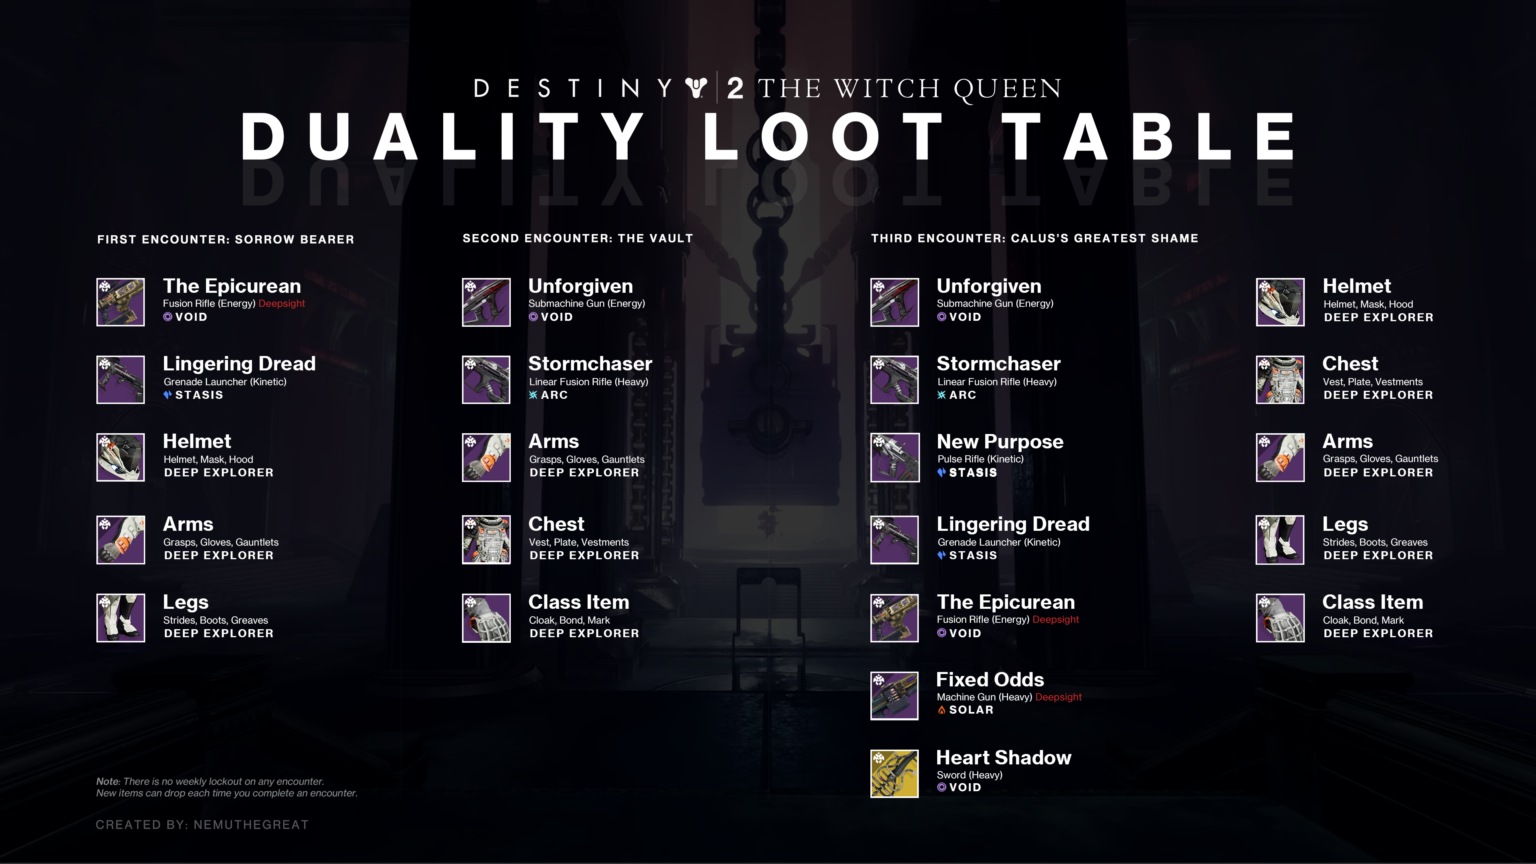 Duality loot table in Destiny 2 Dungeon weapons, armor, and Exotic